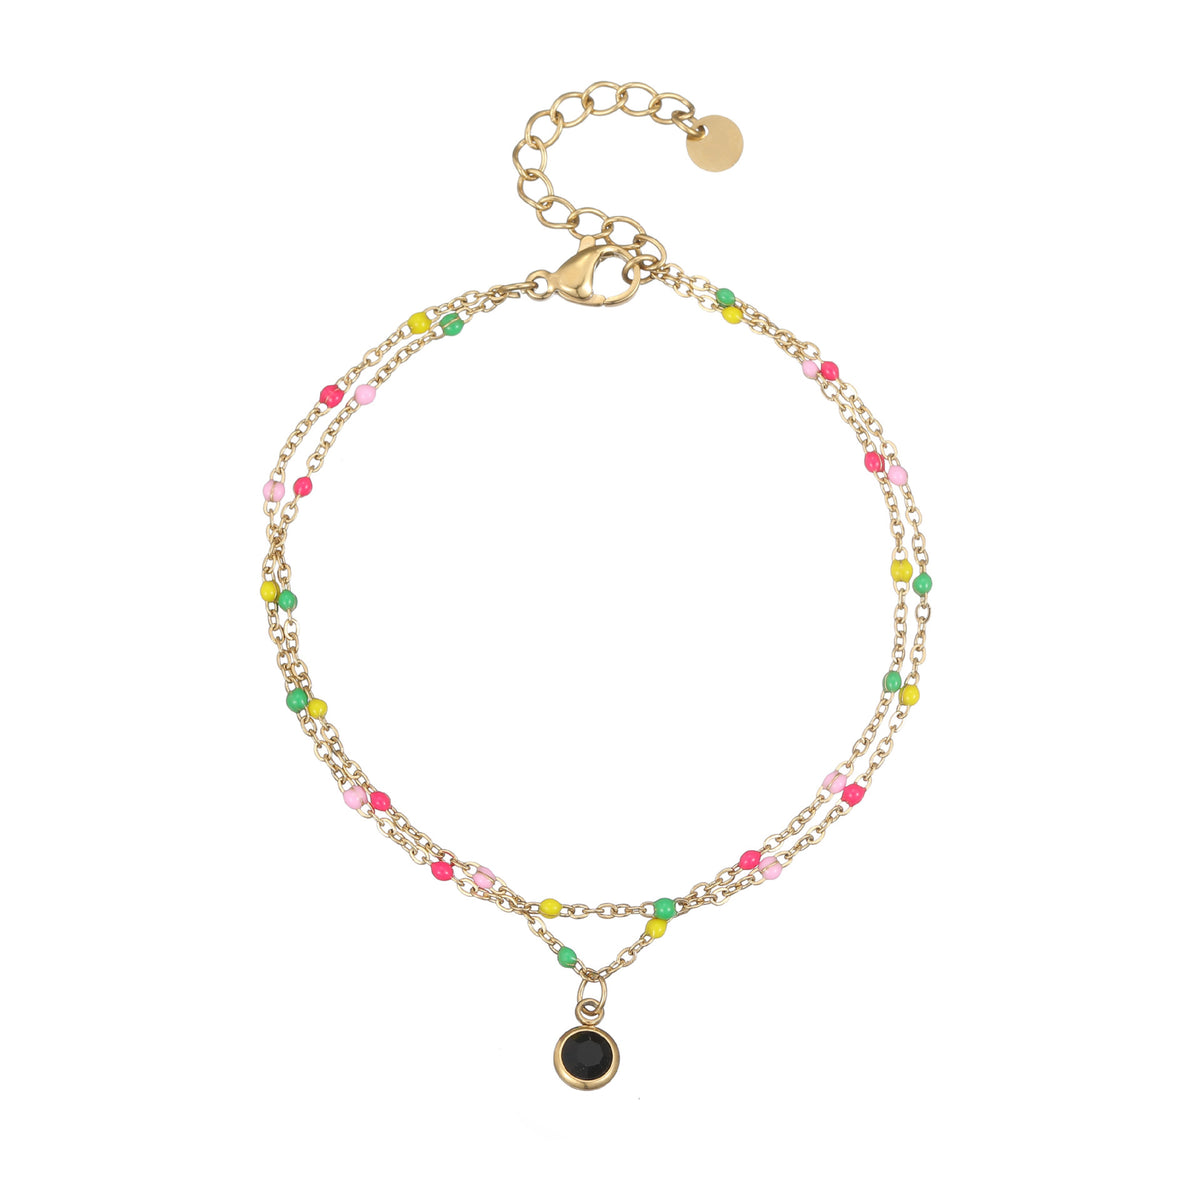 Simple Fashion Versatile Korean-Style 2-Layer Bracelet with Colorful Beads and Unique Design  UponBasics Black  